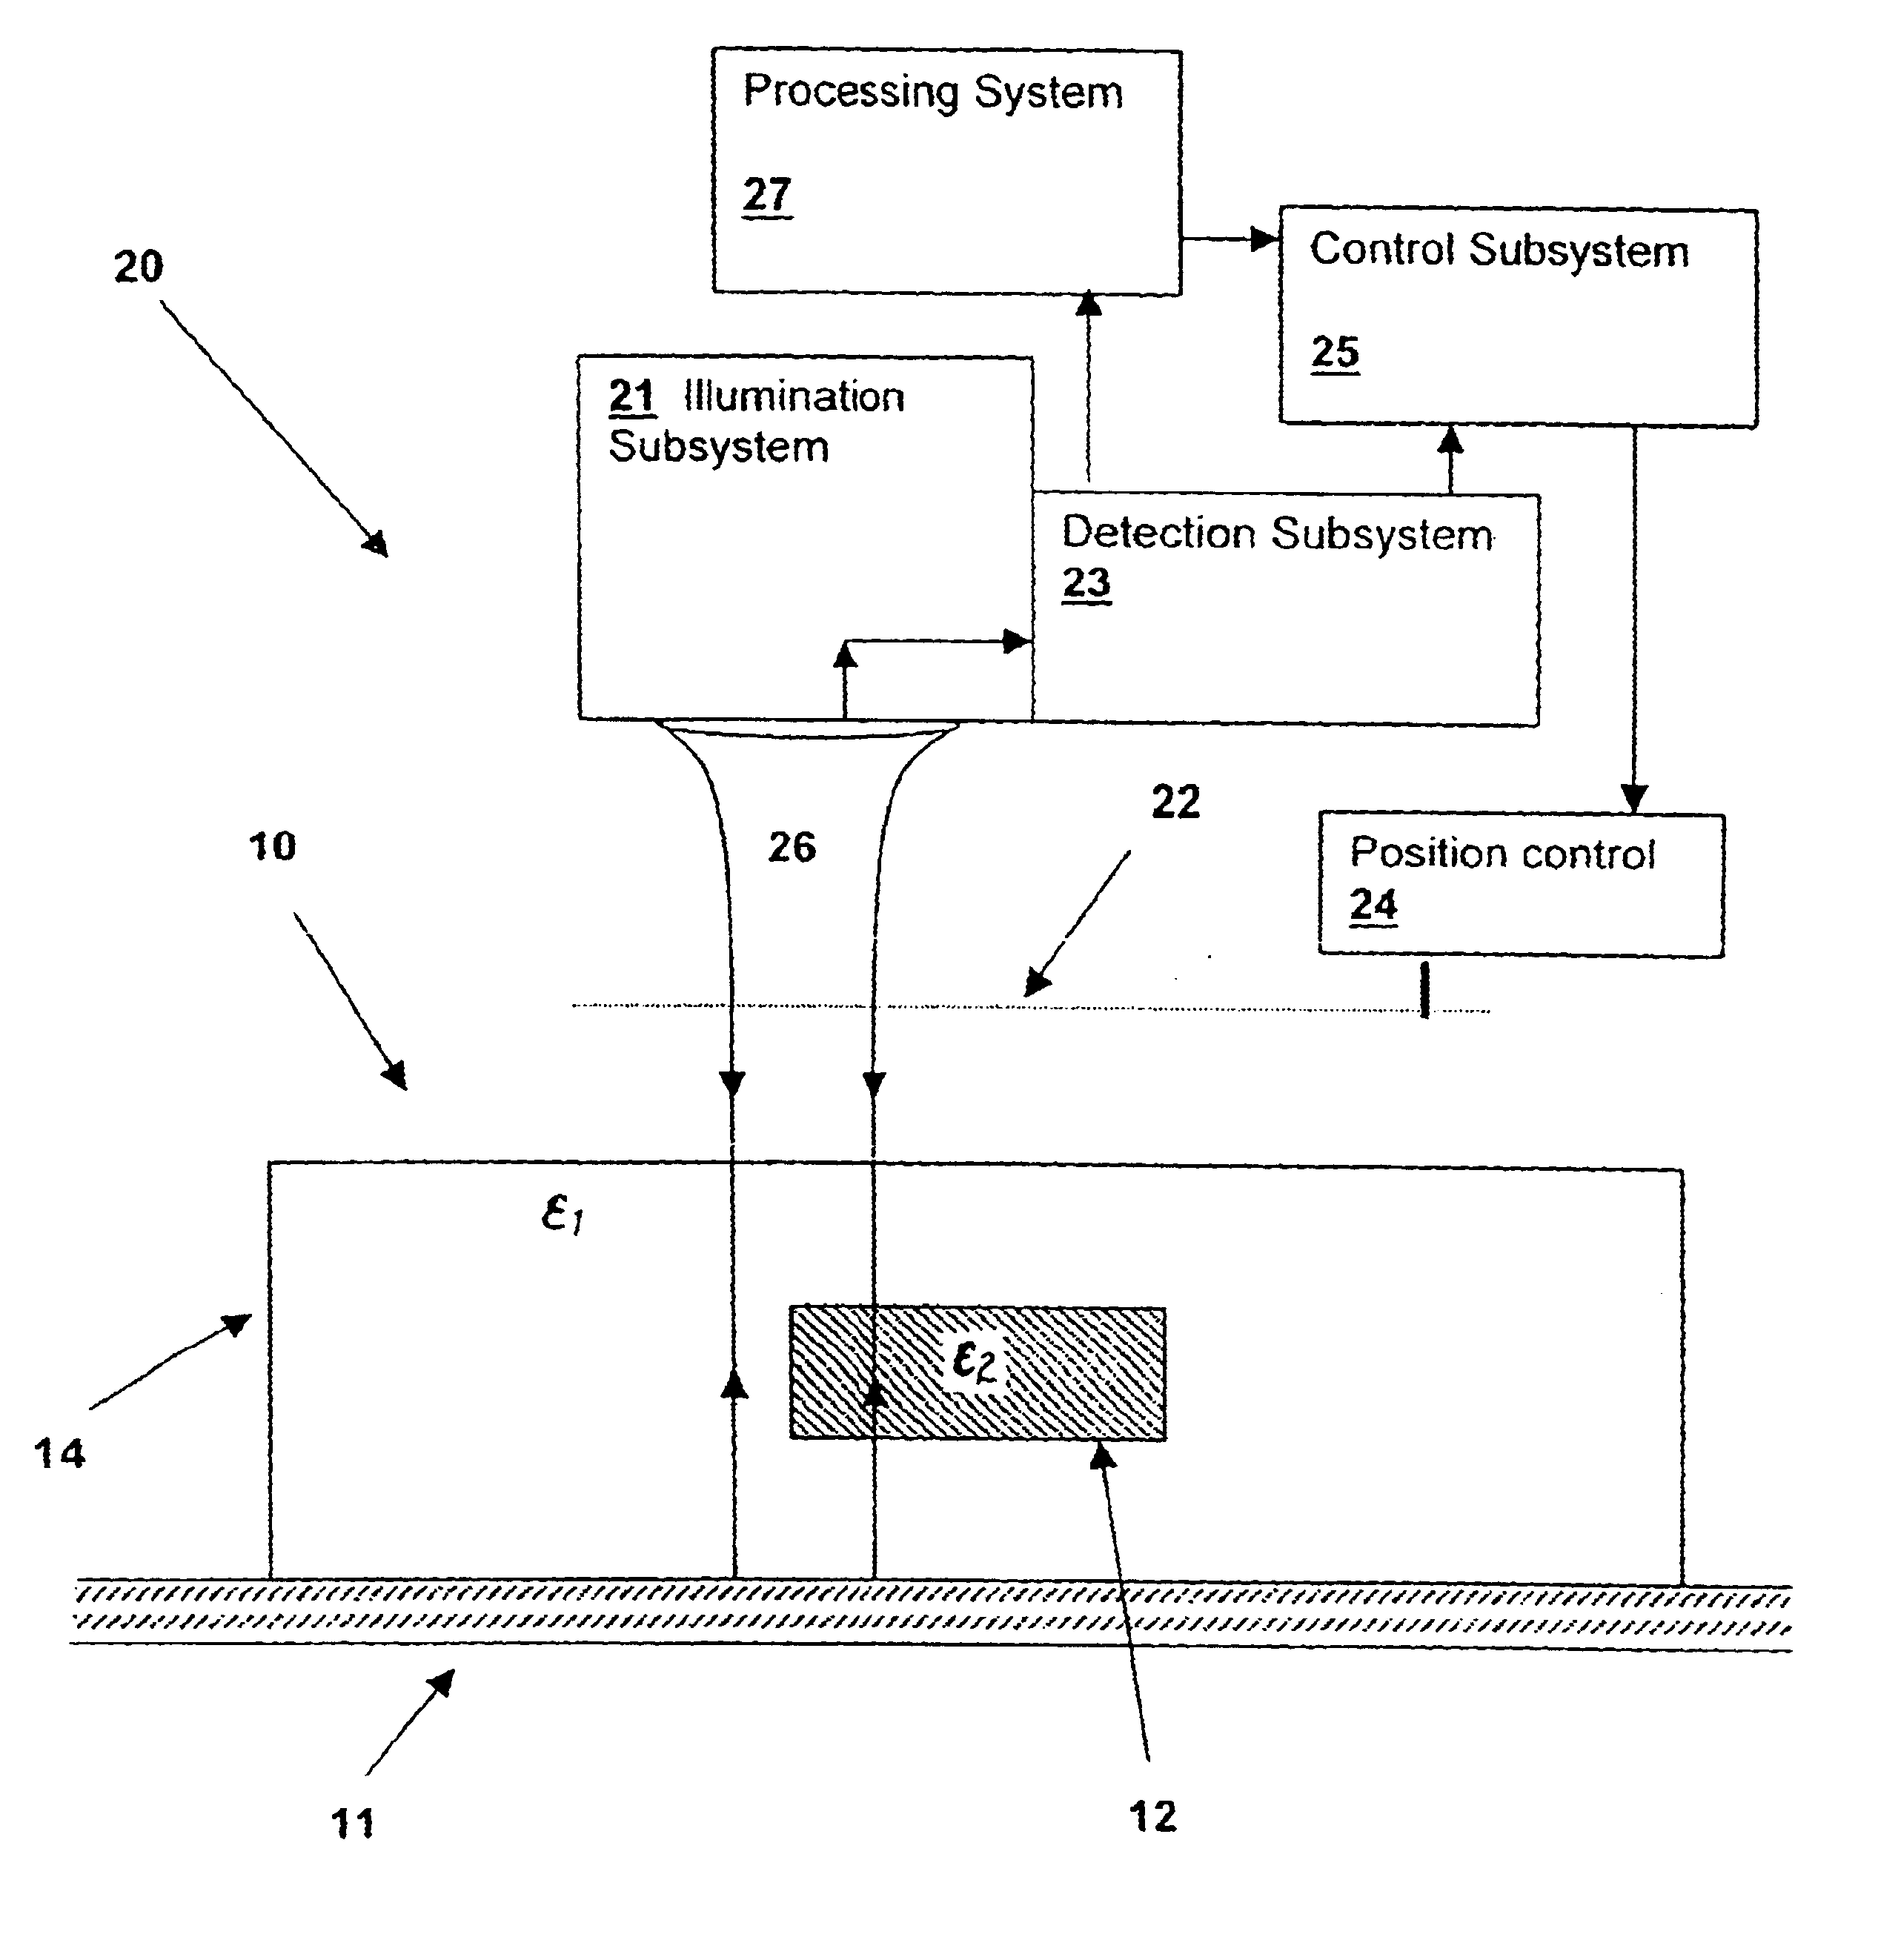 Optical measurement and inspection method and apparatus having enhanced optical path difference detection